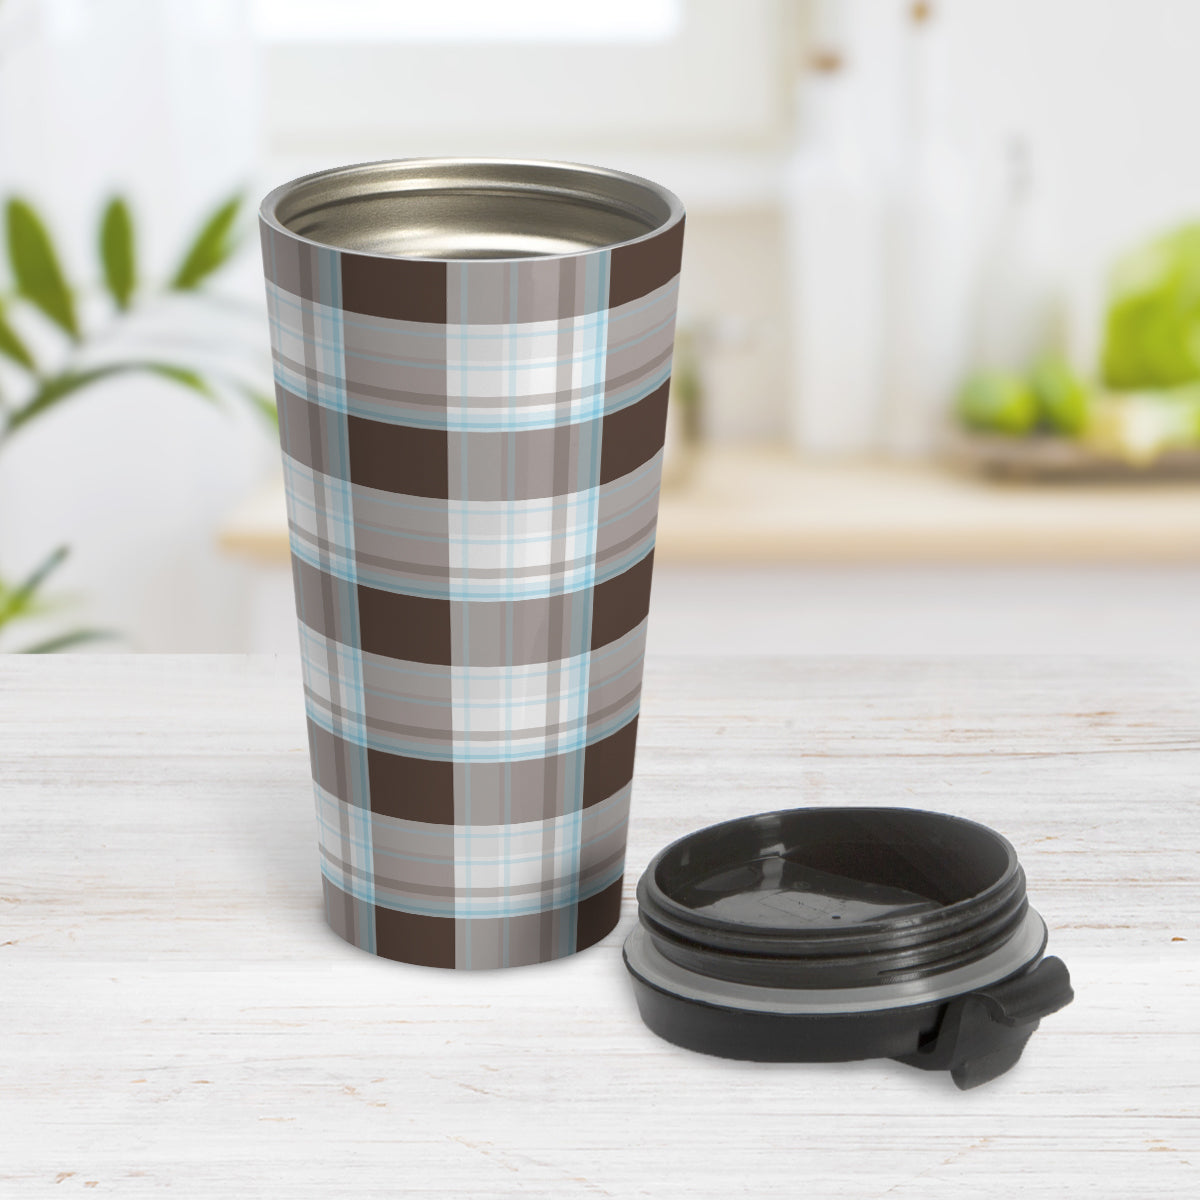 Brown Blue Plaid Travel Mug (15oz, stainless steel insulated) at Amy's Coffee Mugs